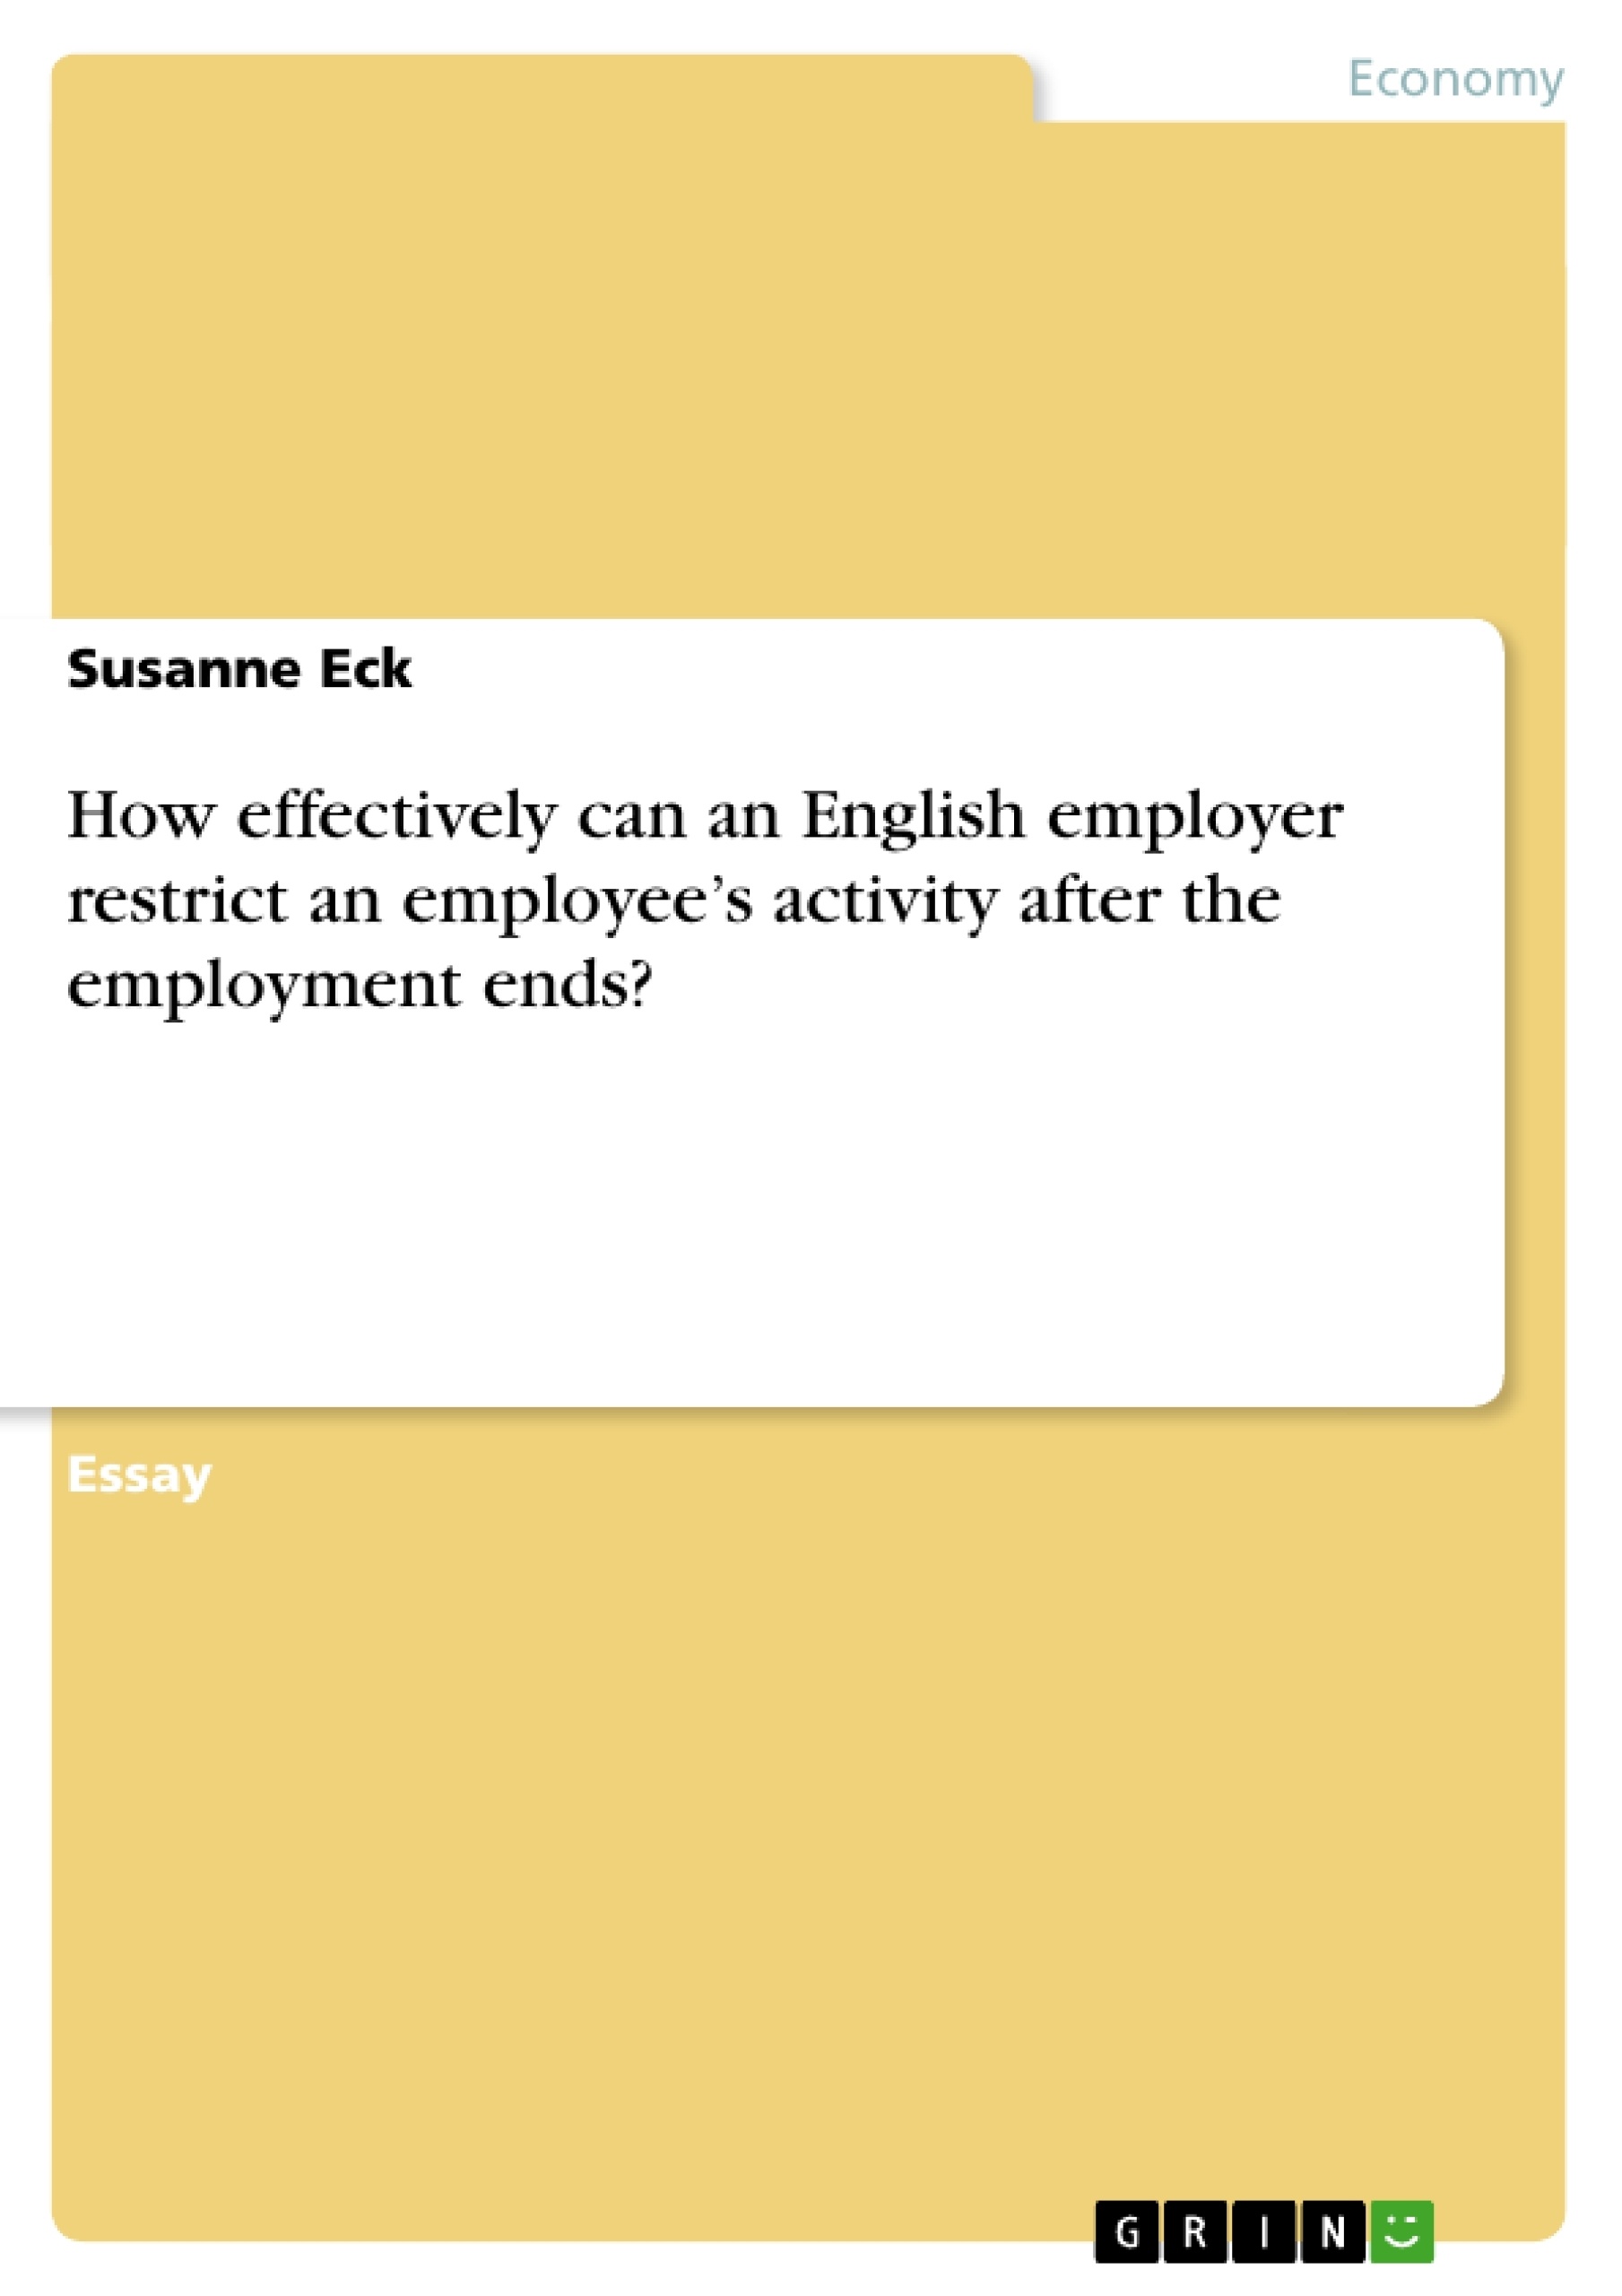 Title: How effectively can an English employer restrict an employee’s activity after the employment ends?